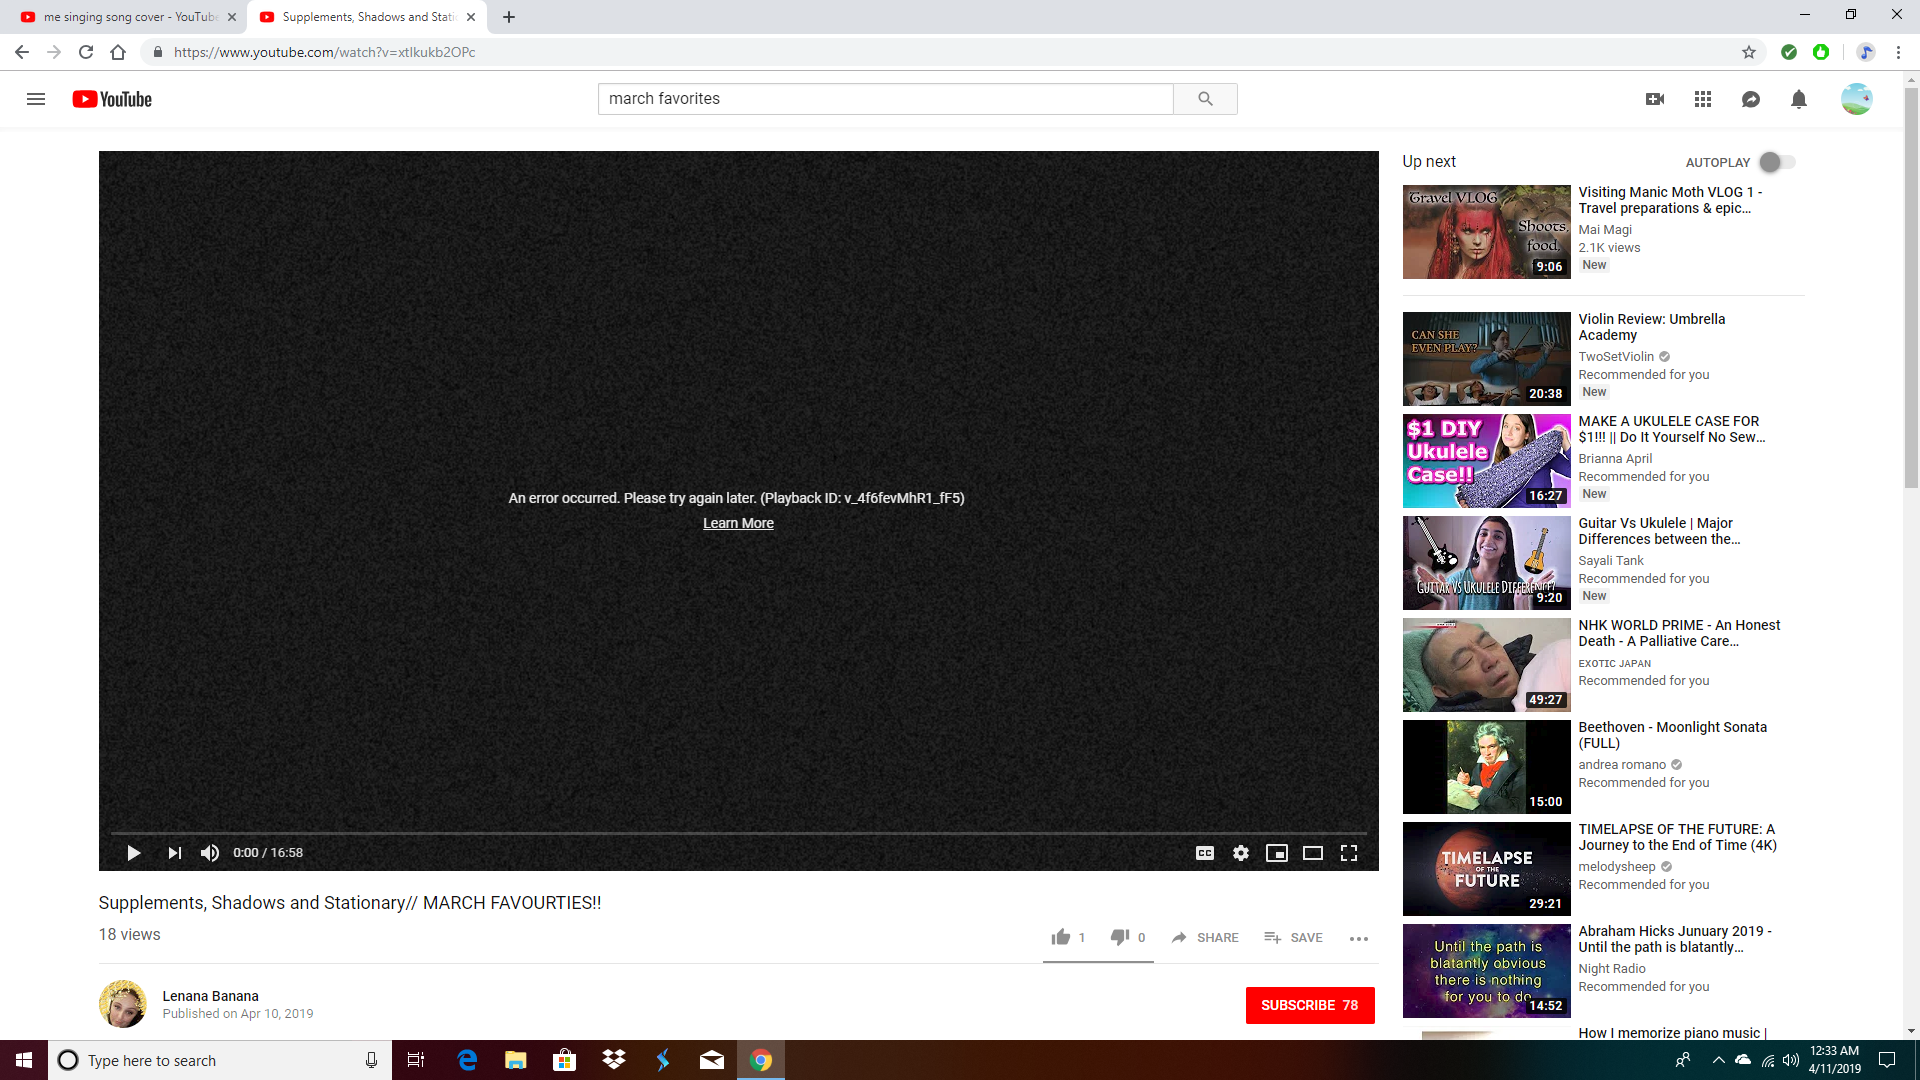 i cannot watch youtube videos an error occurred